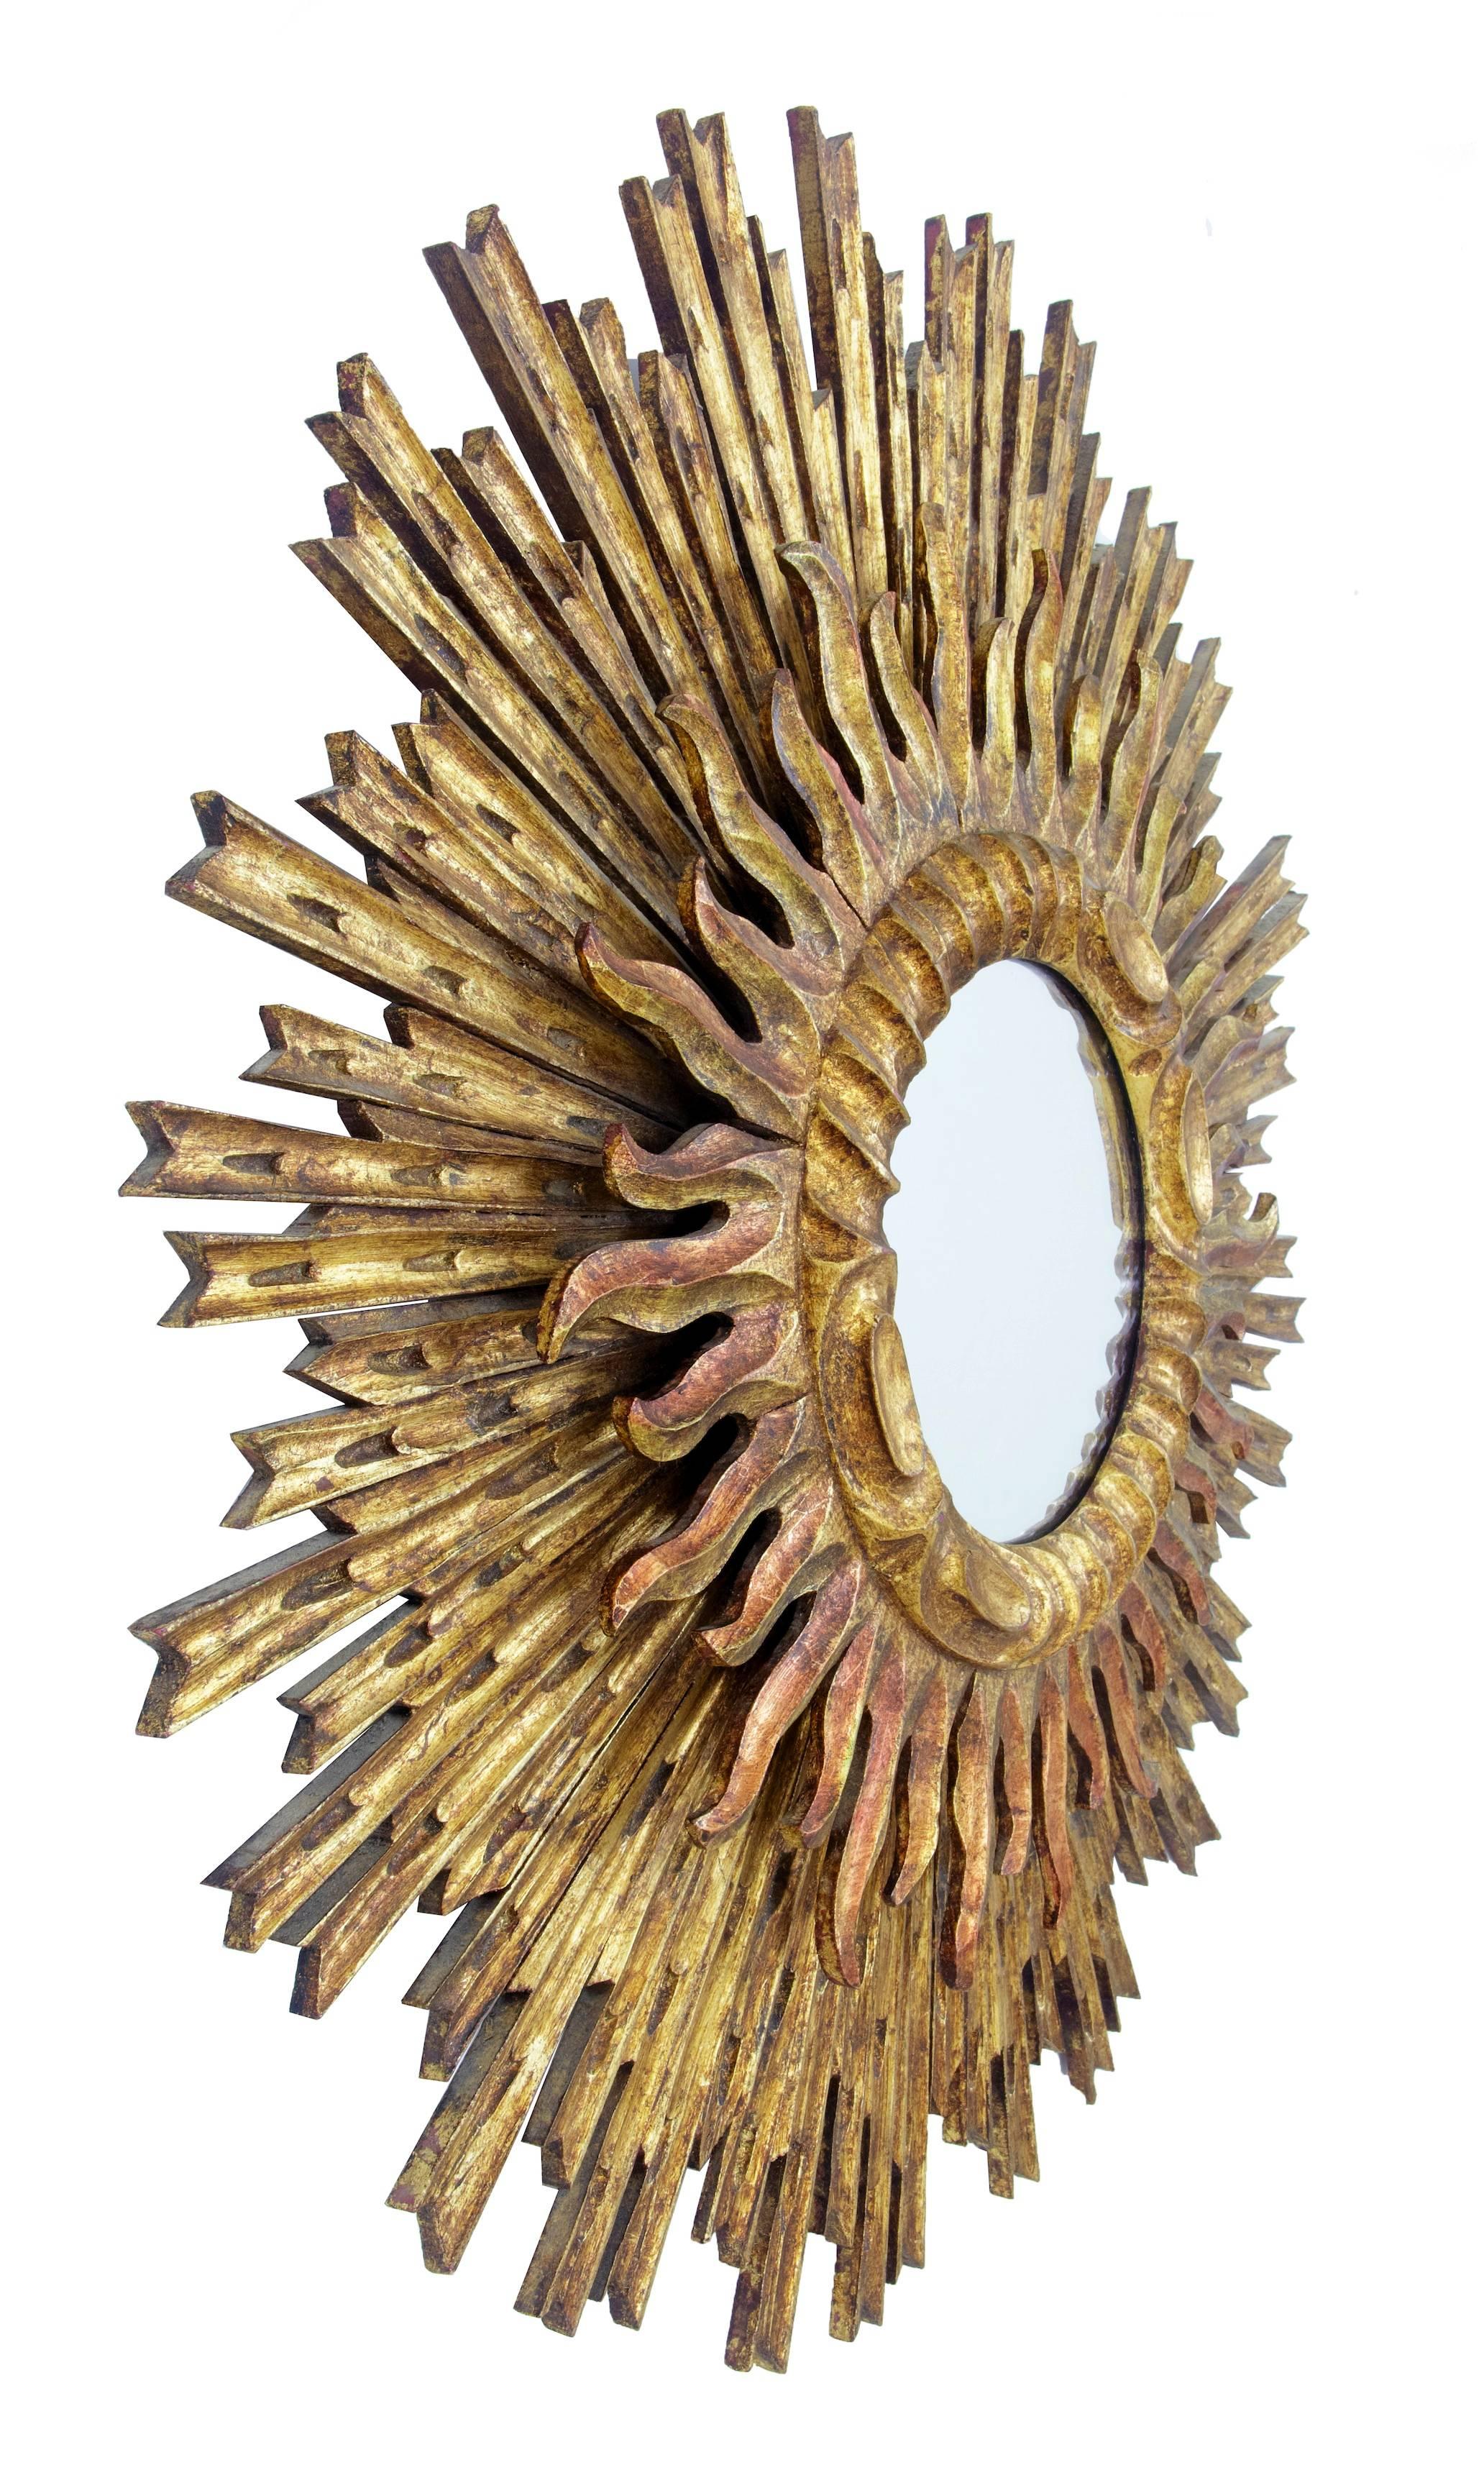 Very good quality sunburst mirror, circa 1960.
Double layered in effect with central round mirror.

Measures: Diameter: 32